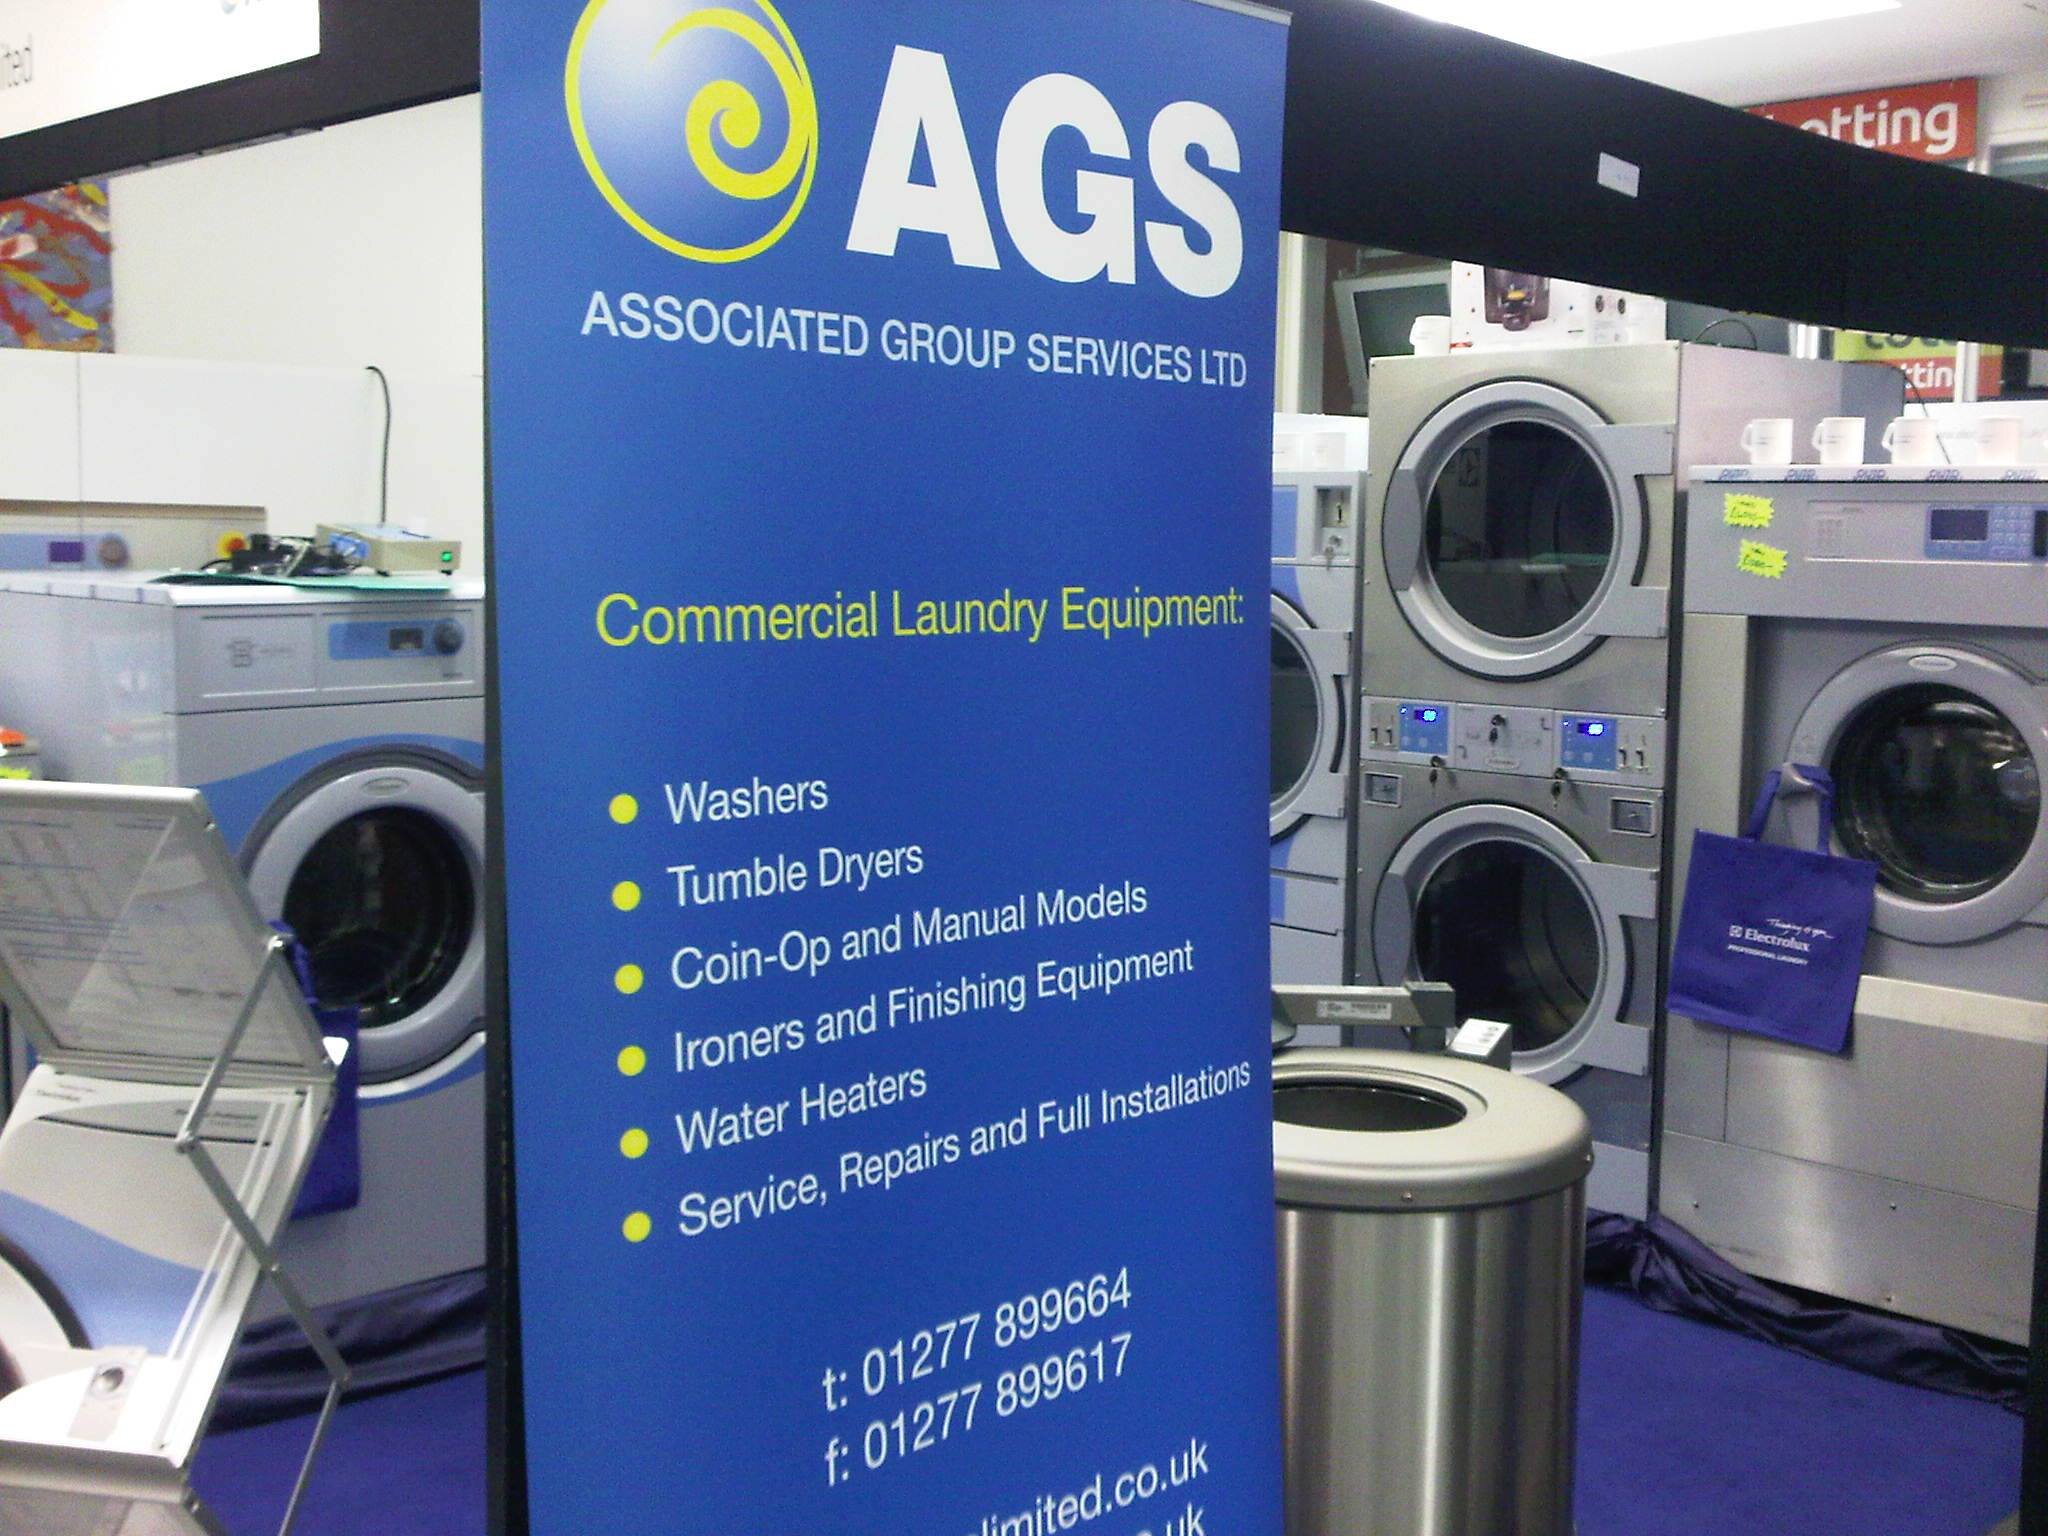 AGS Ltd are approved dealers of Electrolux Commercial/Industrial Laundry equipment. We also install, maintain and service all types of laundry equipment.